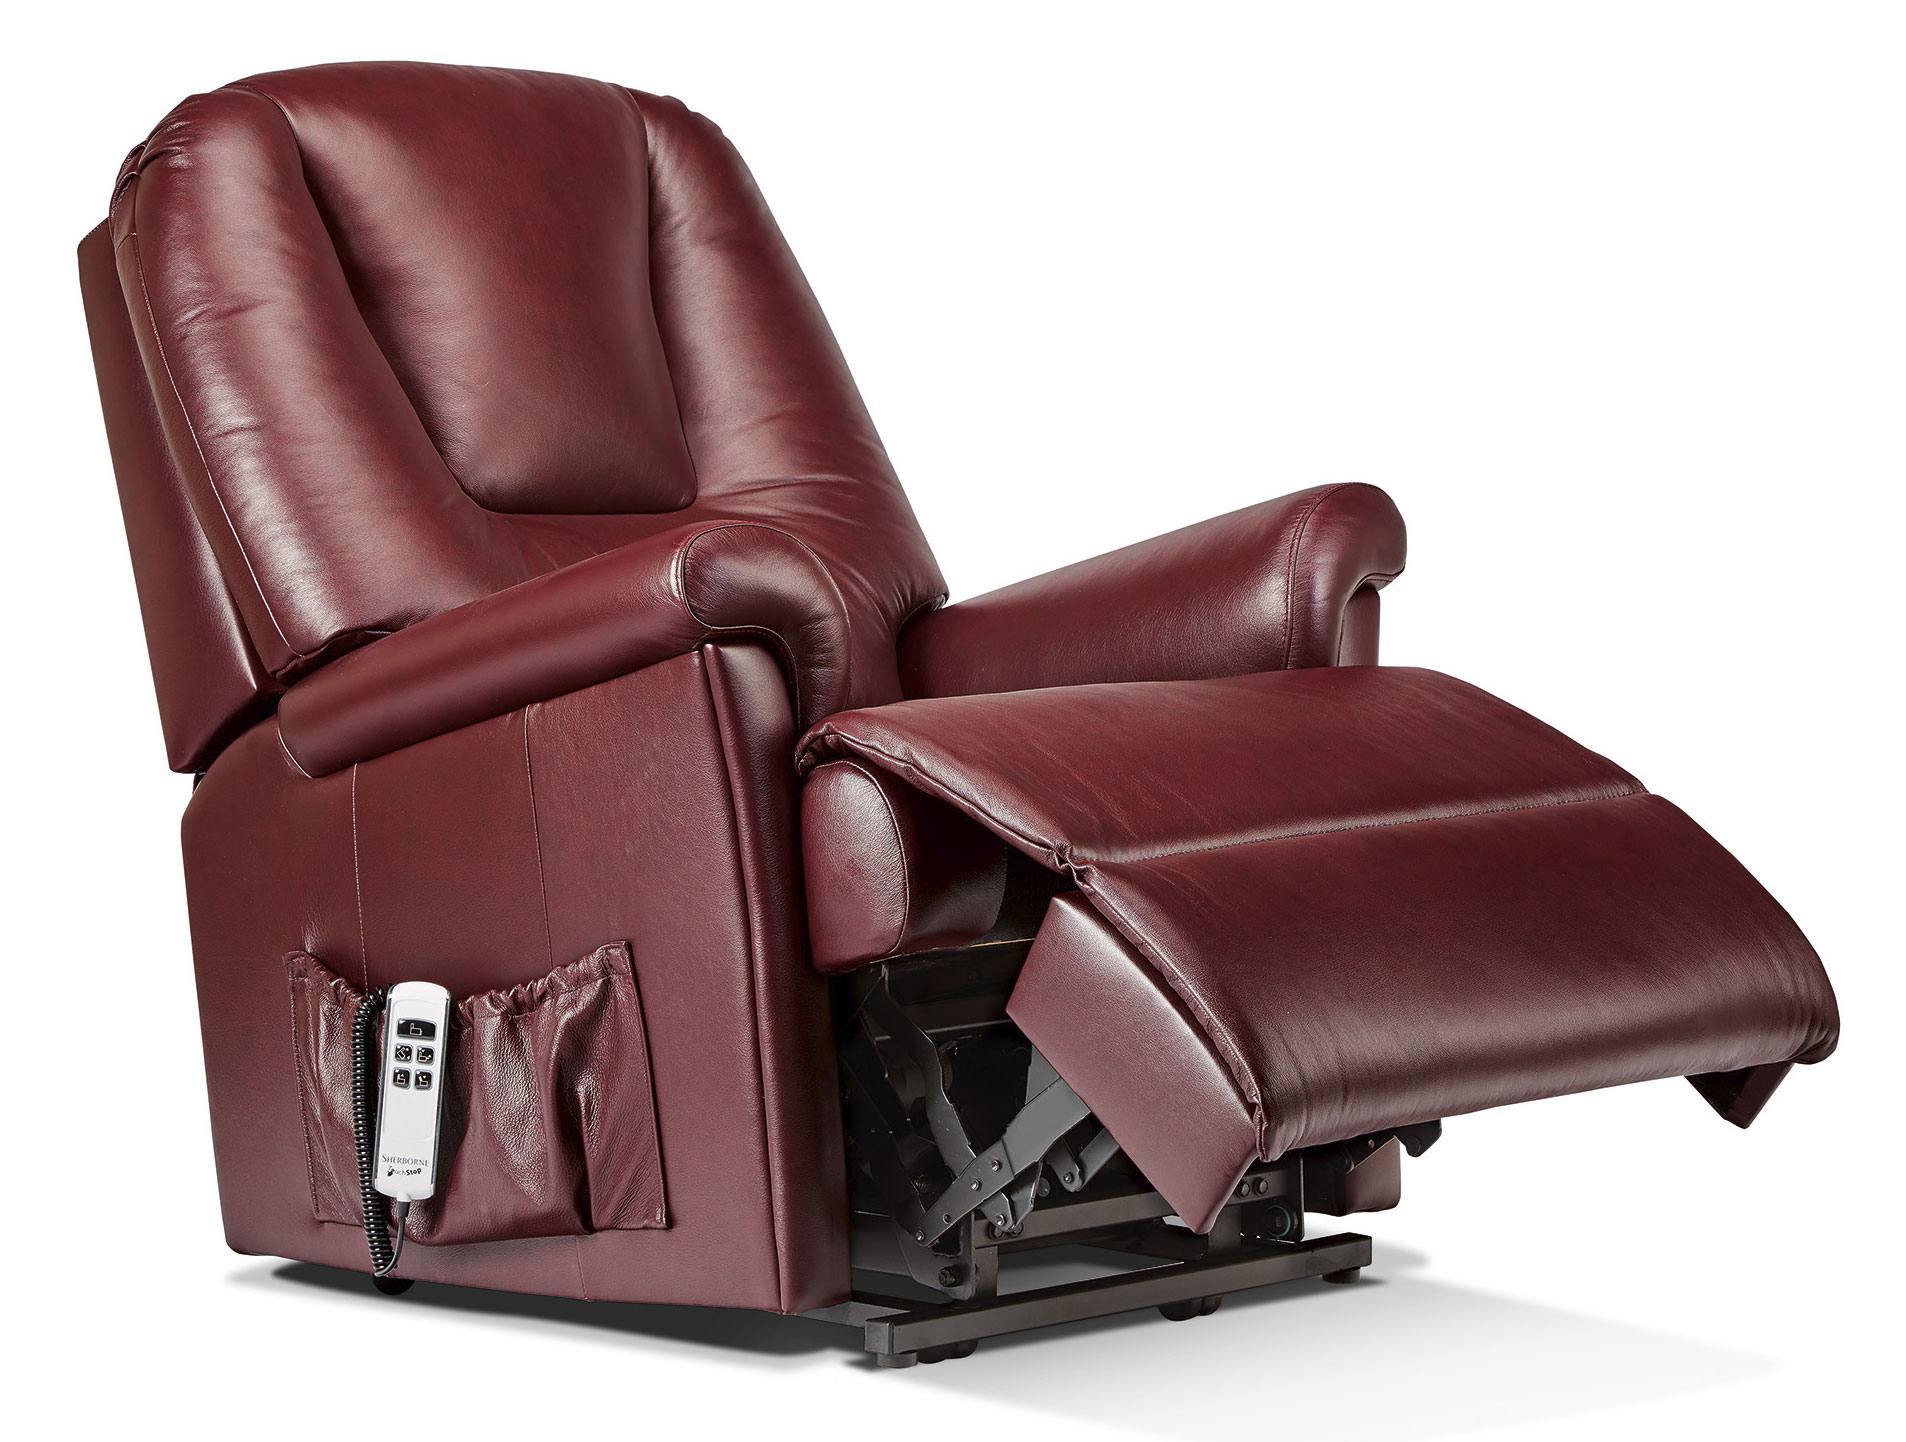 Sherborne Milburn Standard Electric Riser Recliner Chair Vat Included Leather At Relax Sofas 